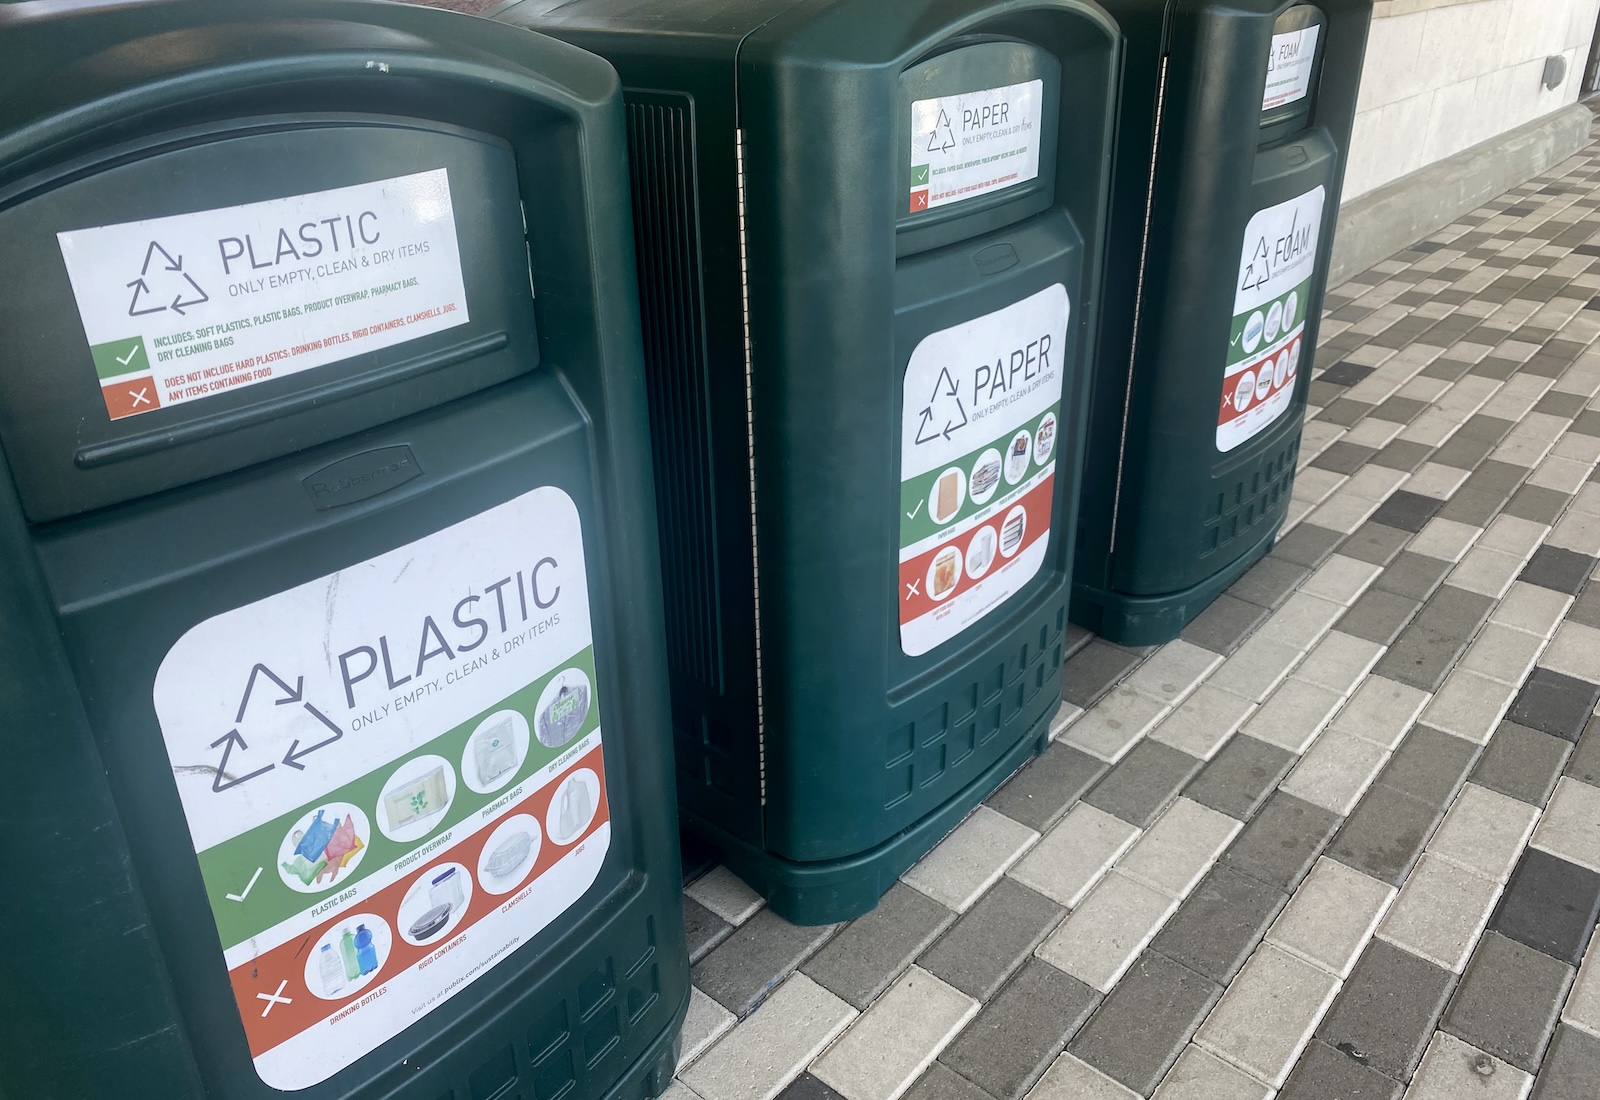 Three green recycling bins for plastic, paper, and foam in a row on a tiled floor. The bins have images on the front of them depicting recyclable items.